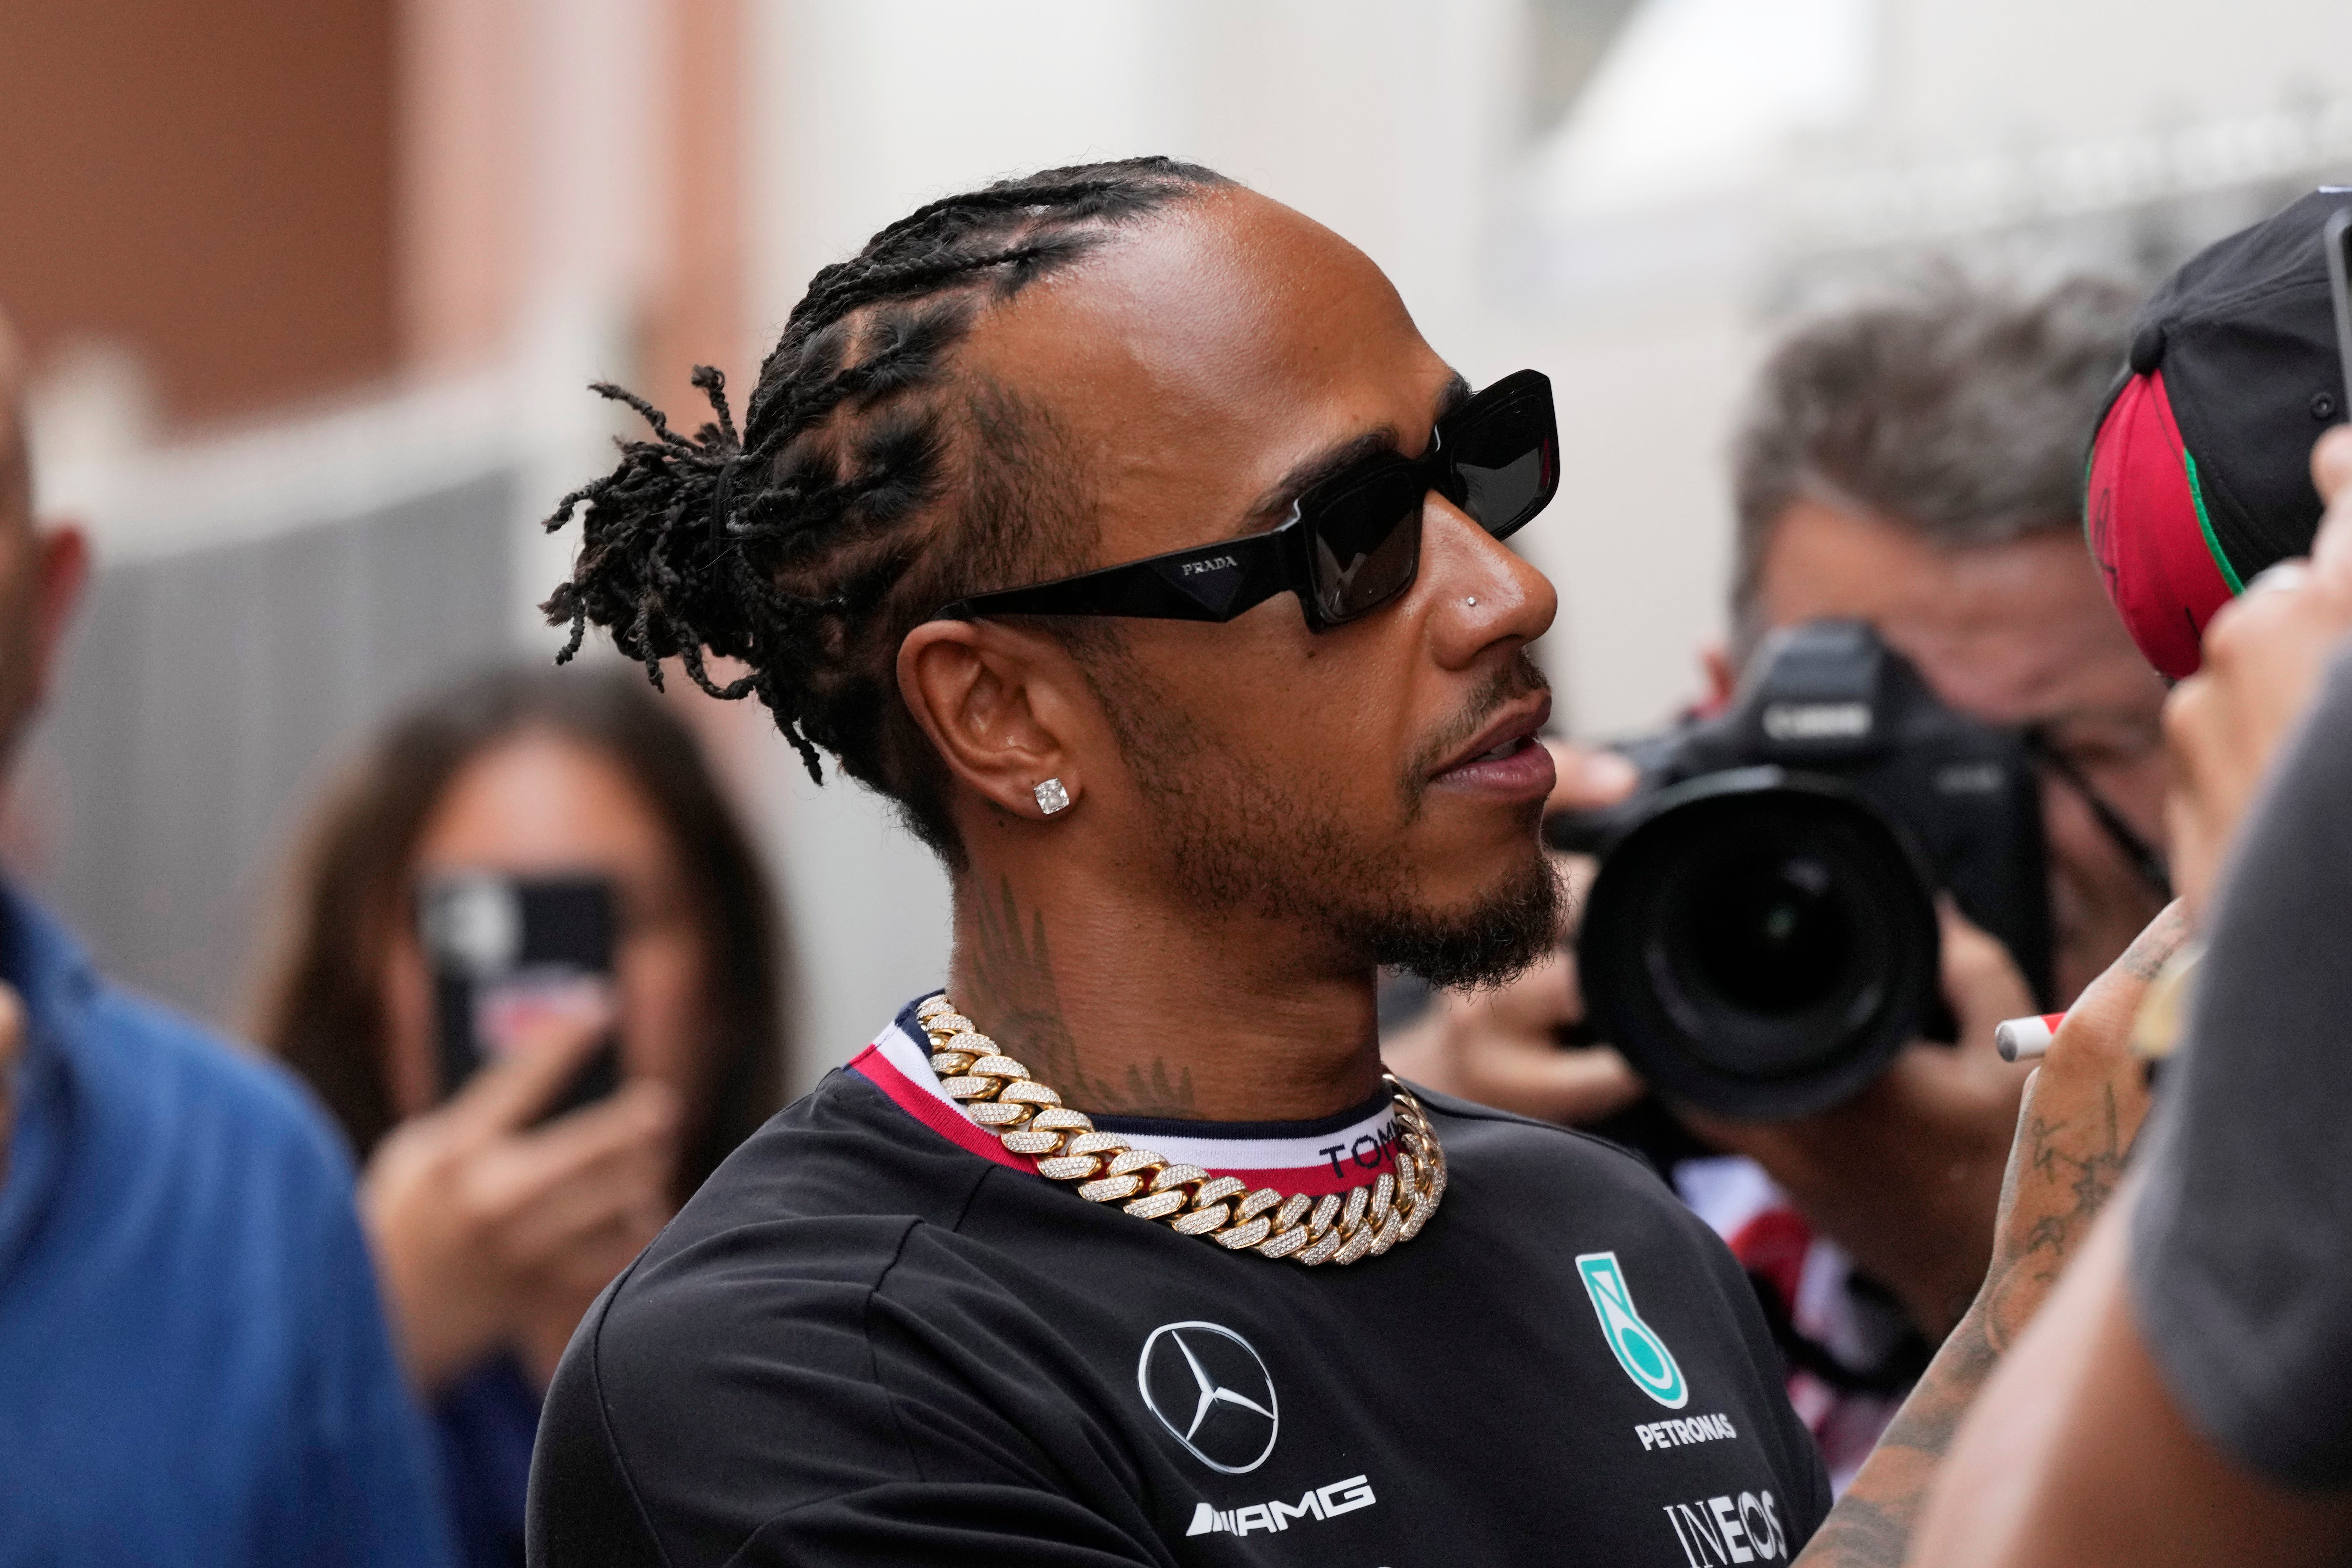 Lewis Hamilton is close to signing a new Mercedes deal